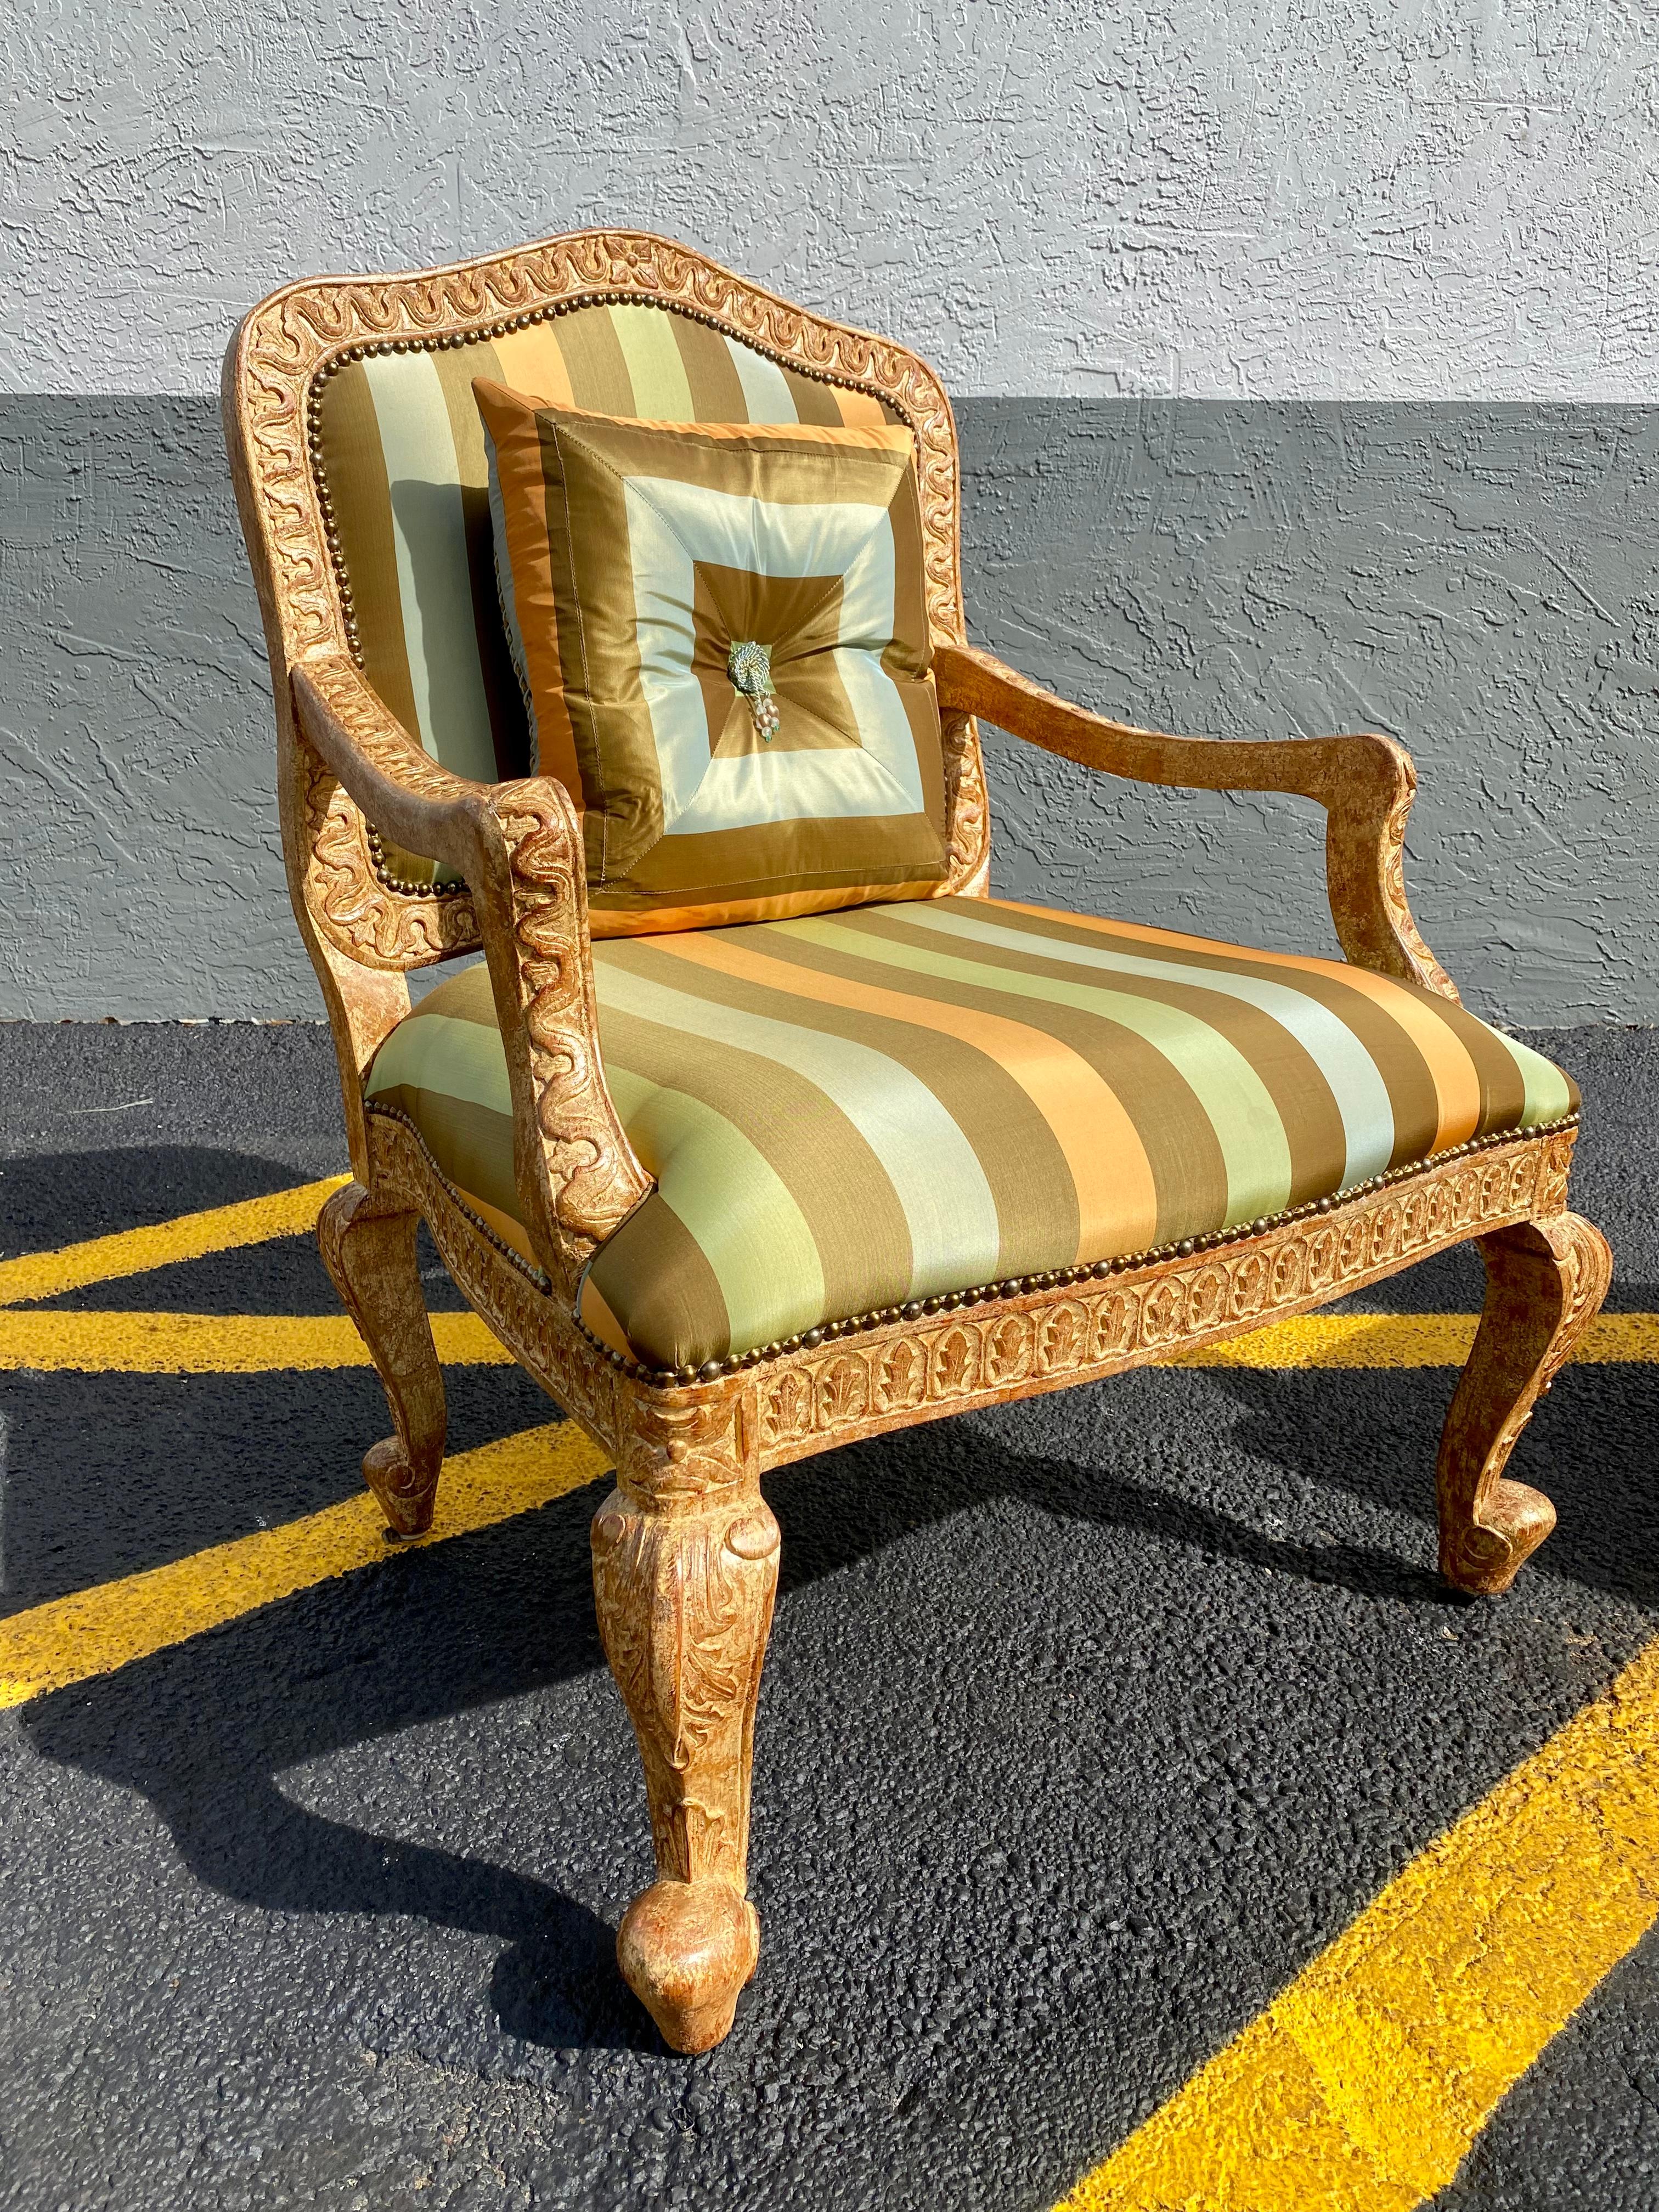 Upholstery 1930s French Carved Gilt Wood Striped Bergere Library Chairs, Set of 2 For Sale